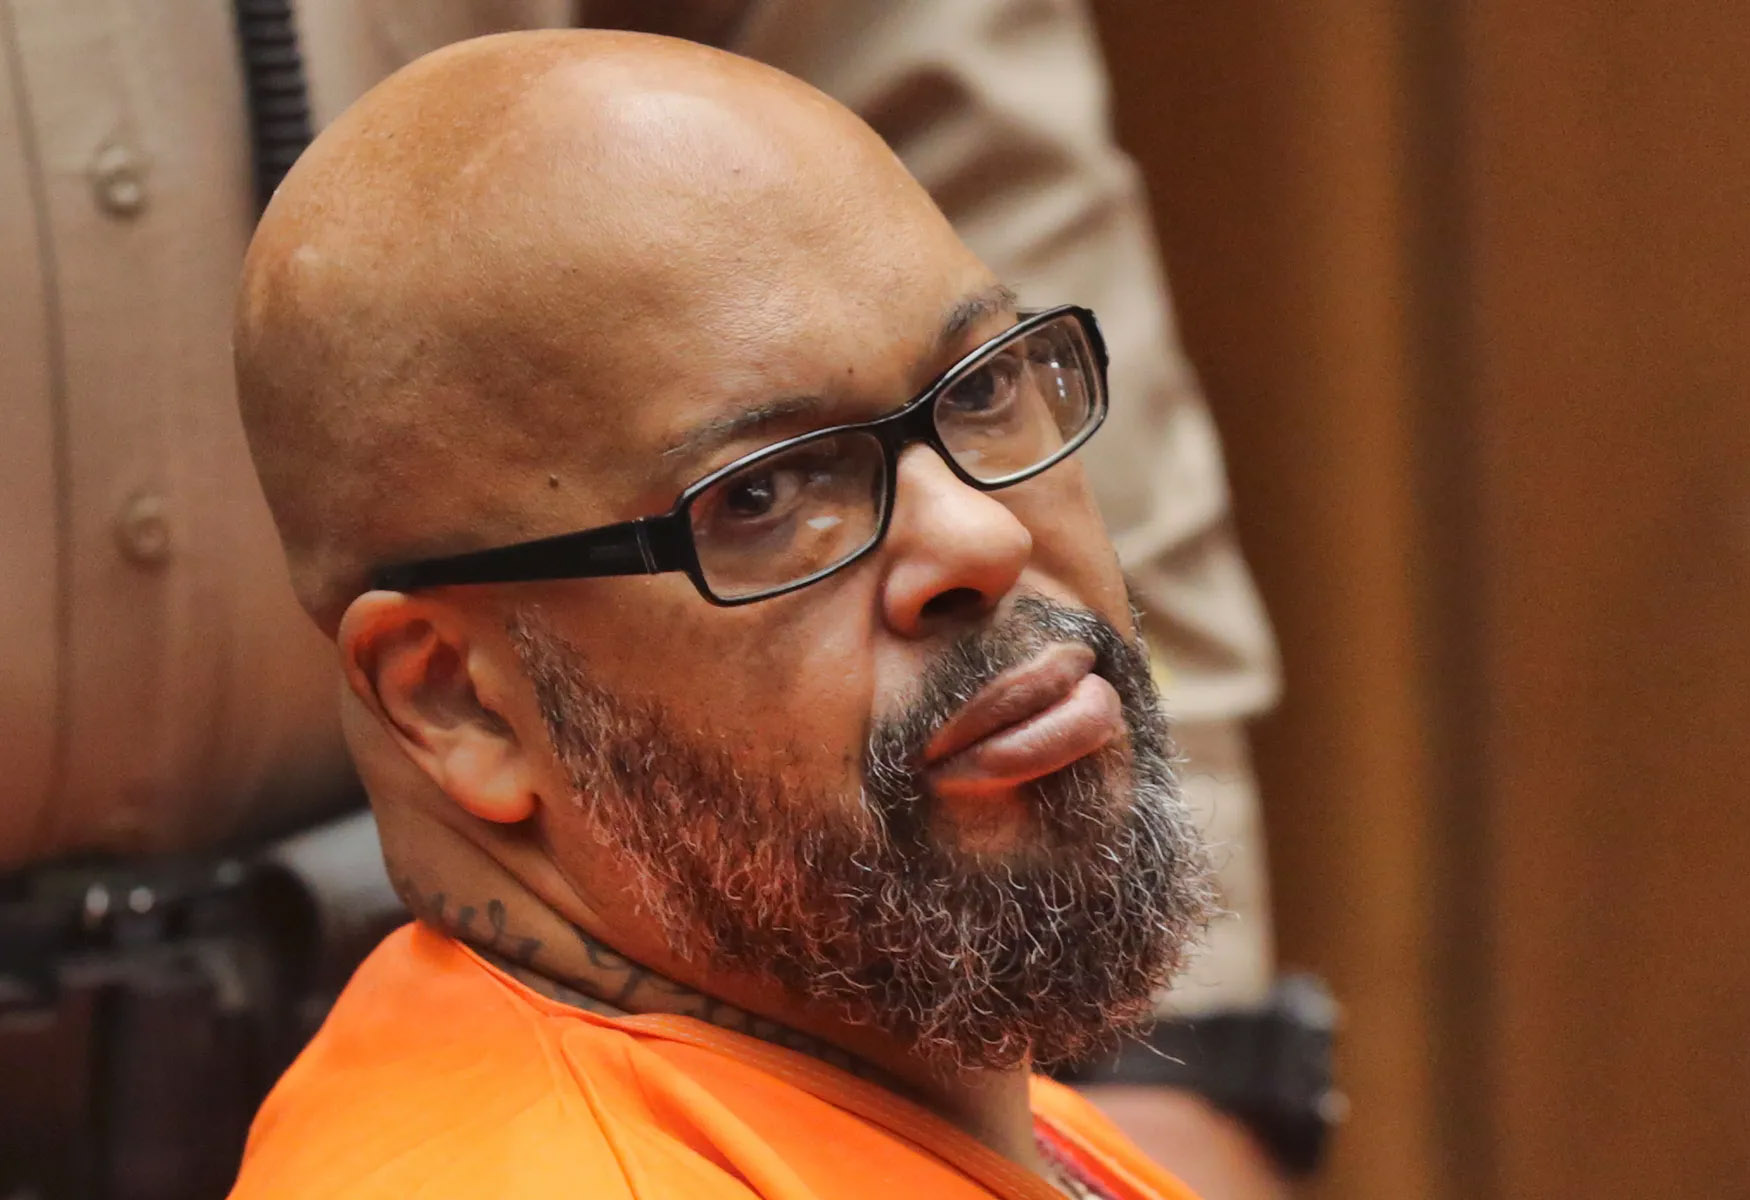 New Podcast Alert: Suge Knight Launches “Collect Calls With Suge Knight” From Prison